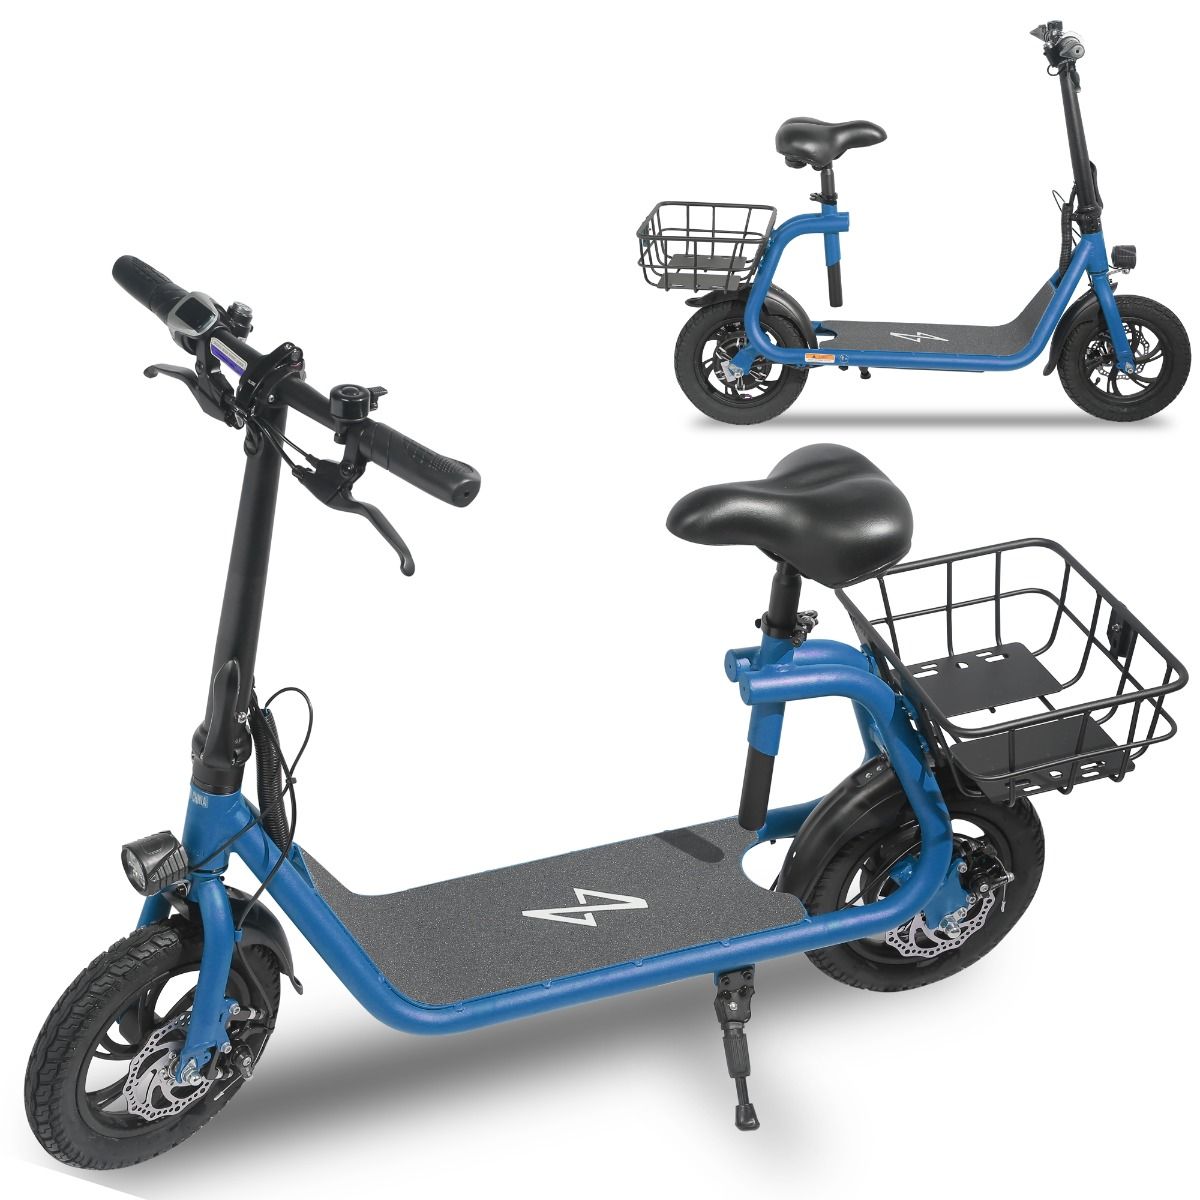 BLUE - Commuter Electric Scooter for Adults - Foldable Scooter with Seat & Carry Basket